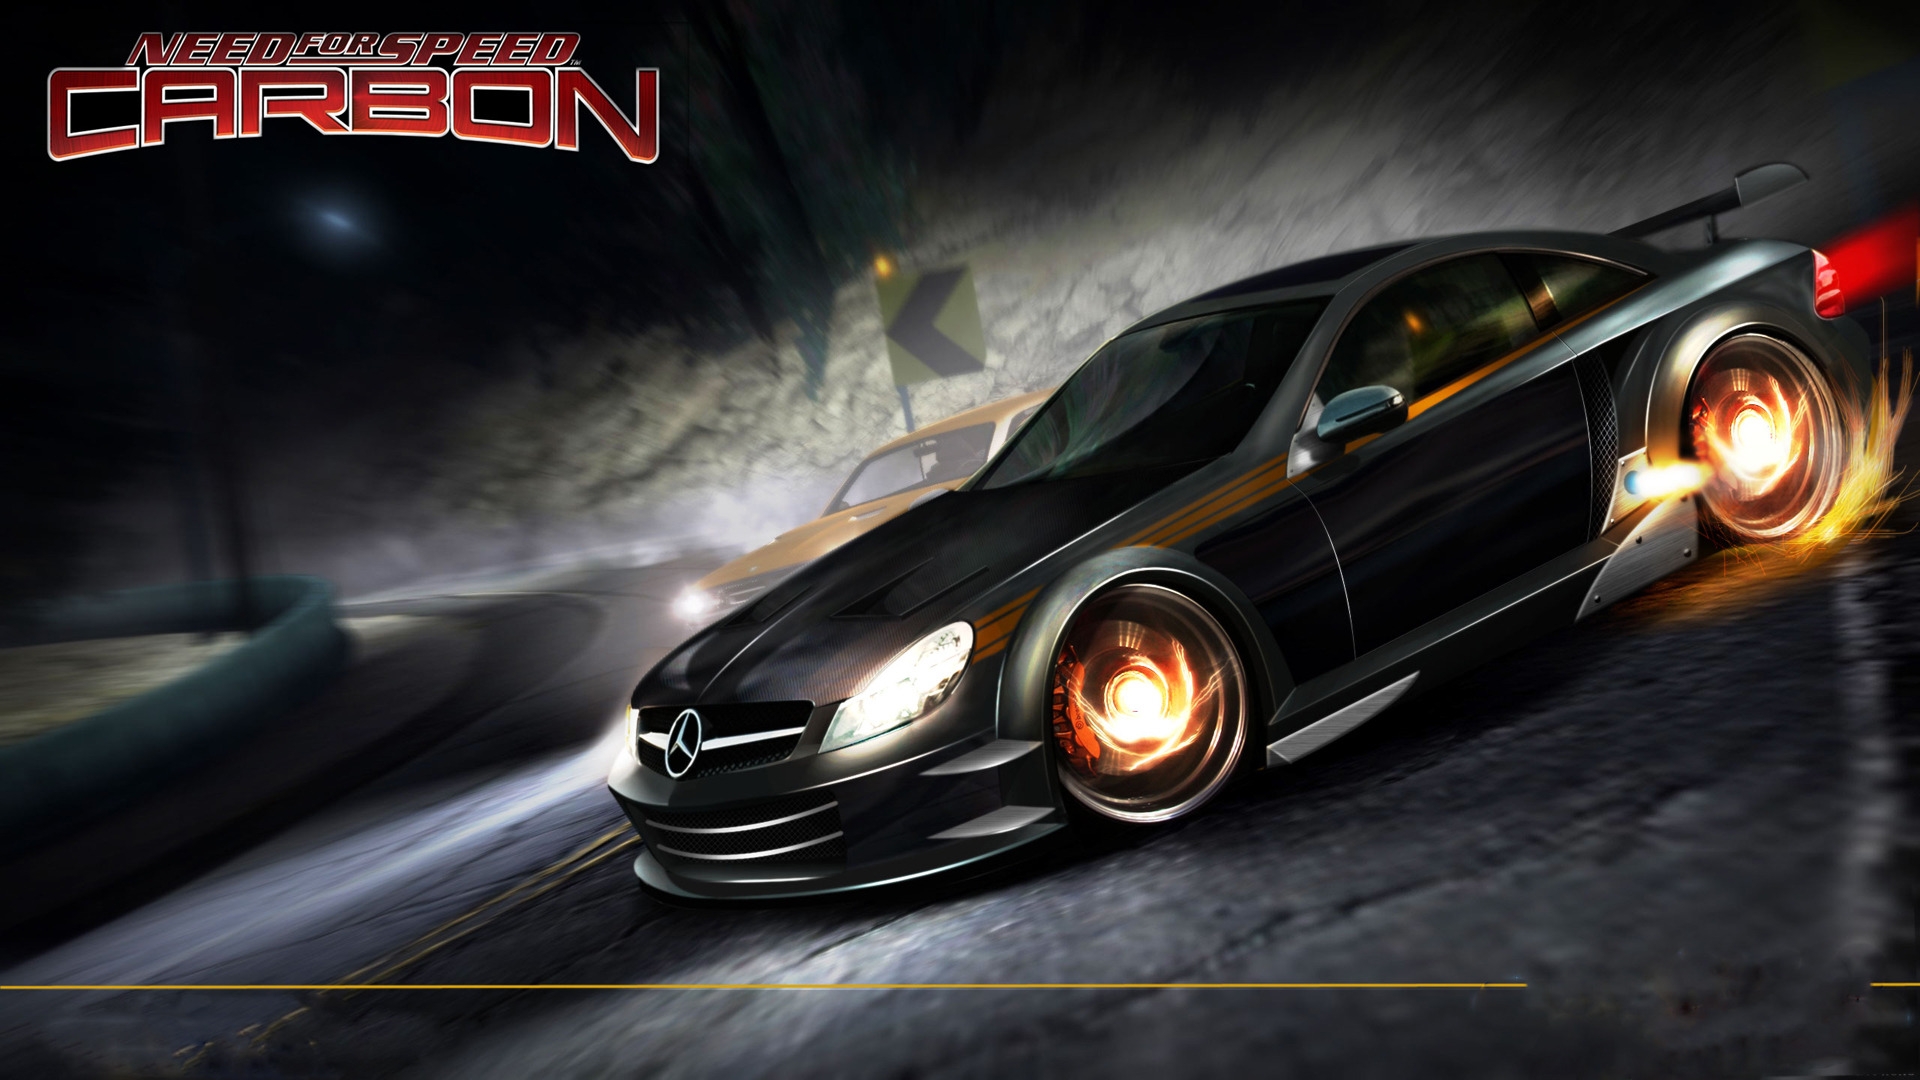 NFS Carbon Mercedes for 1920 x 1080 HDTV 1080p resolution